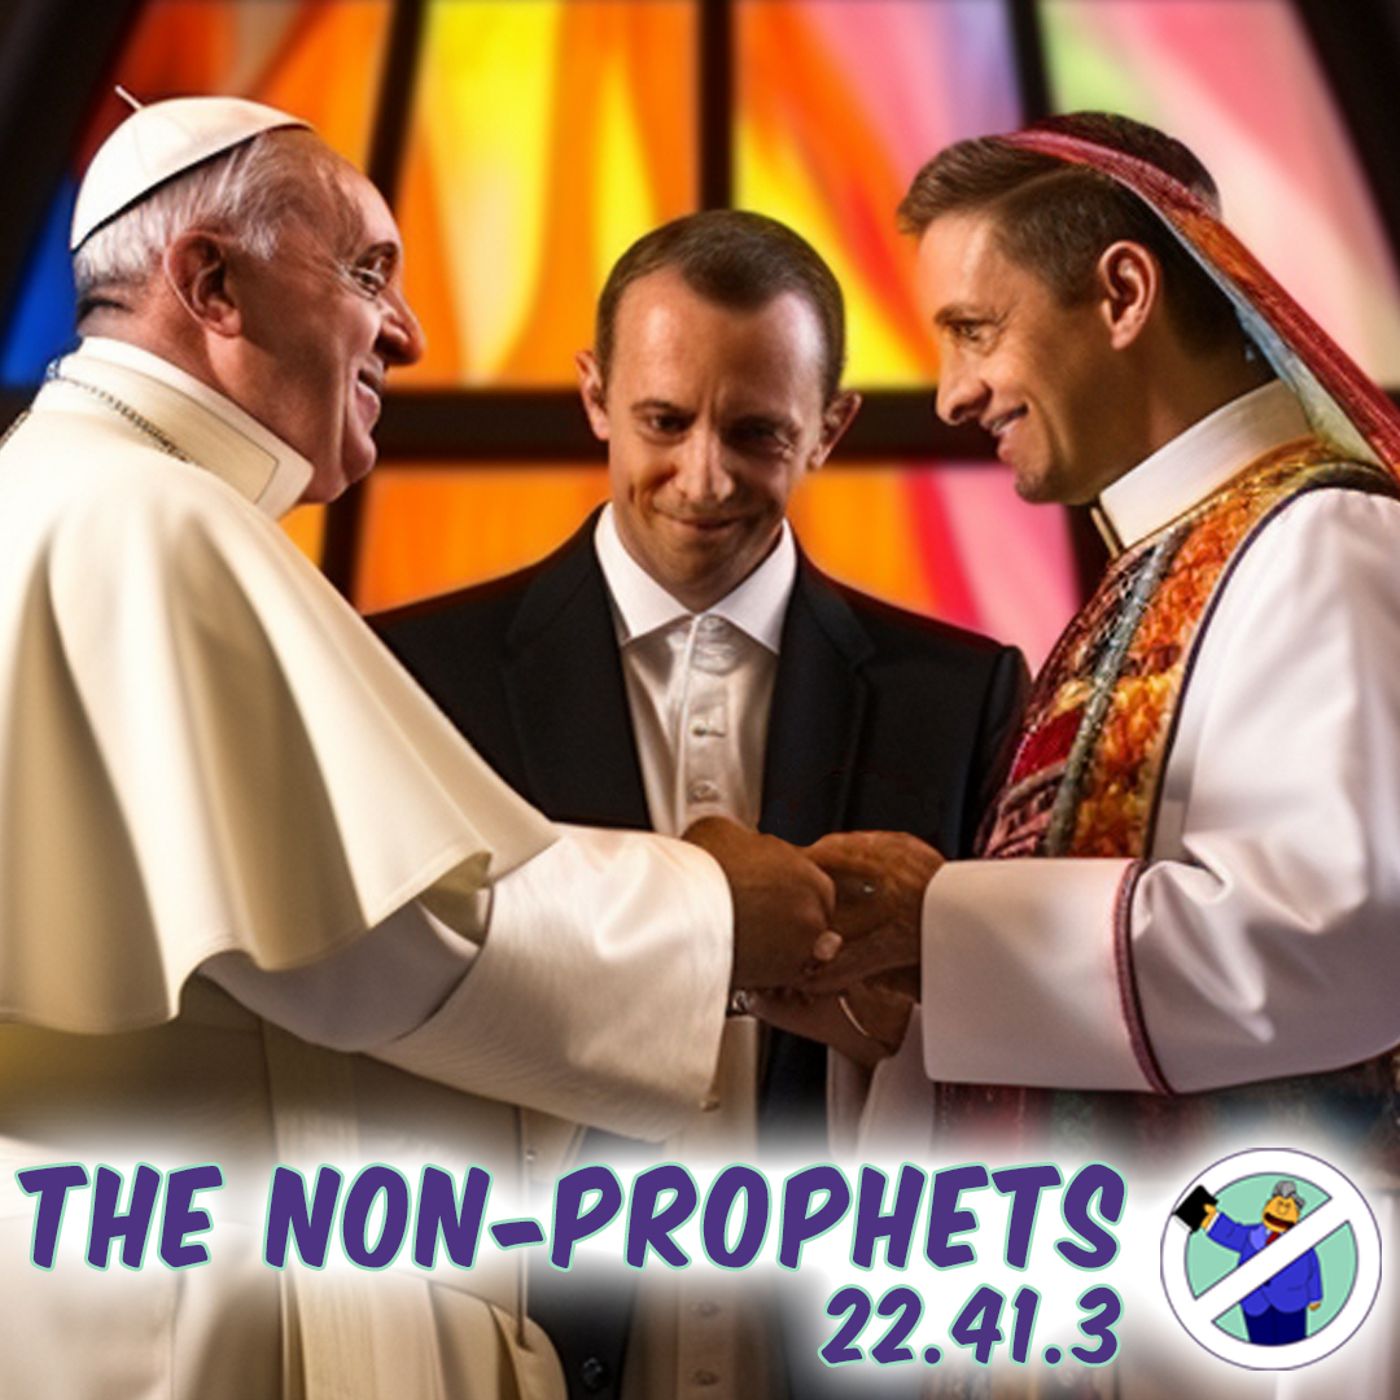 The The Non-Prophets, Episode 22.41.3 featuring Phoebe Rose, Aaron Jensen, Jimmy Jr